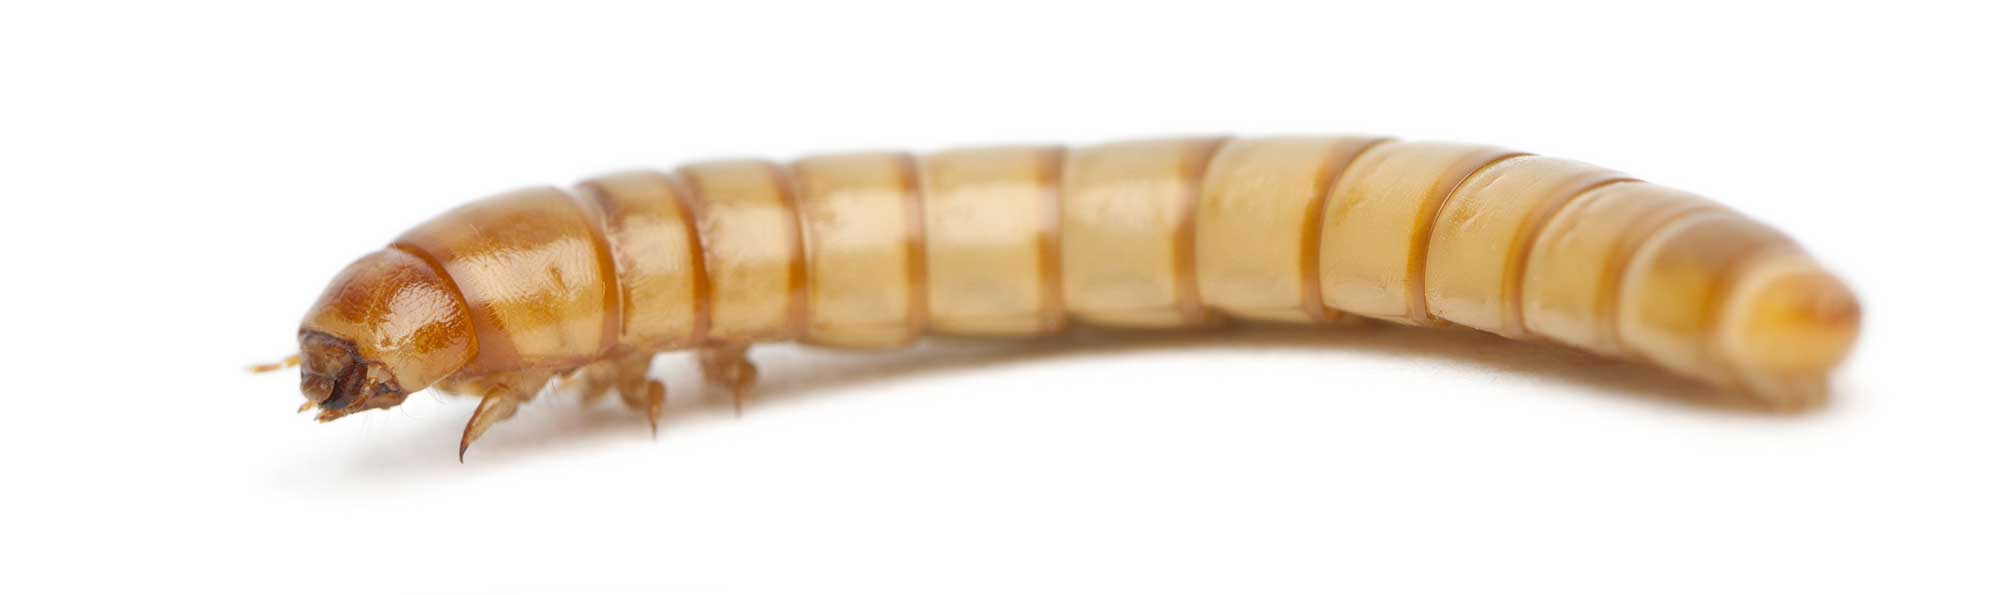 Image of Oversized Mealworm in 3D